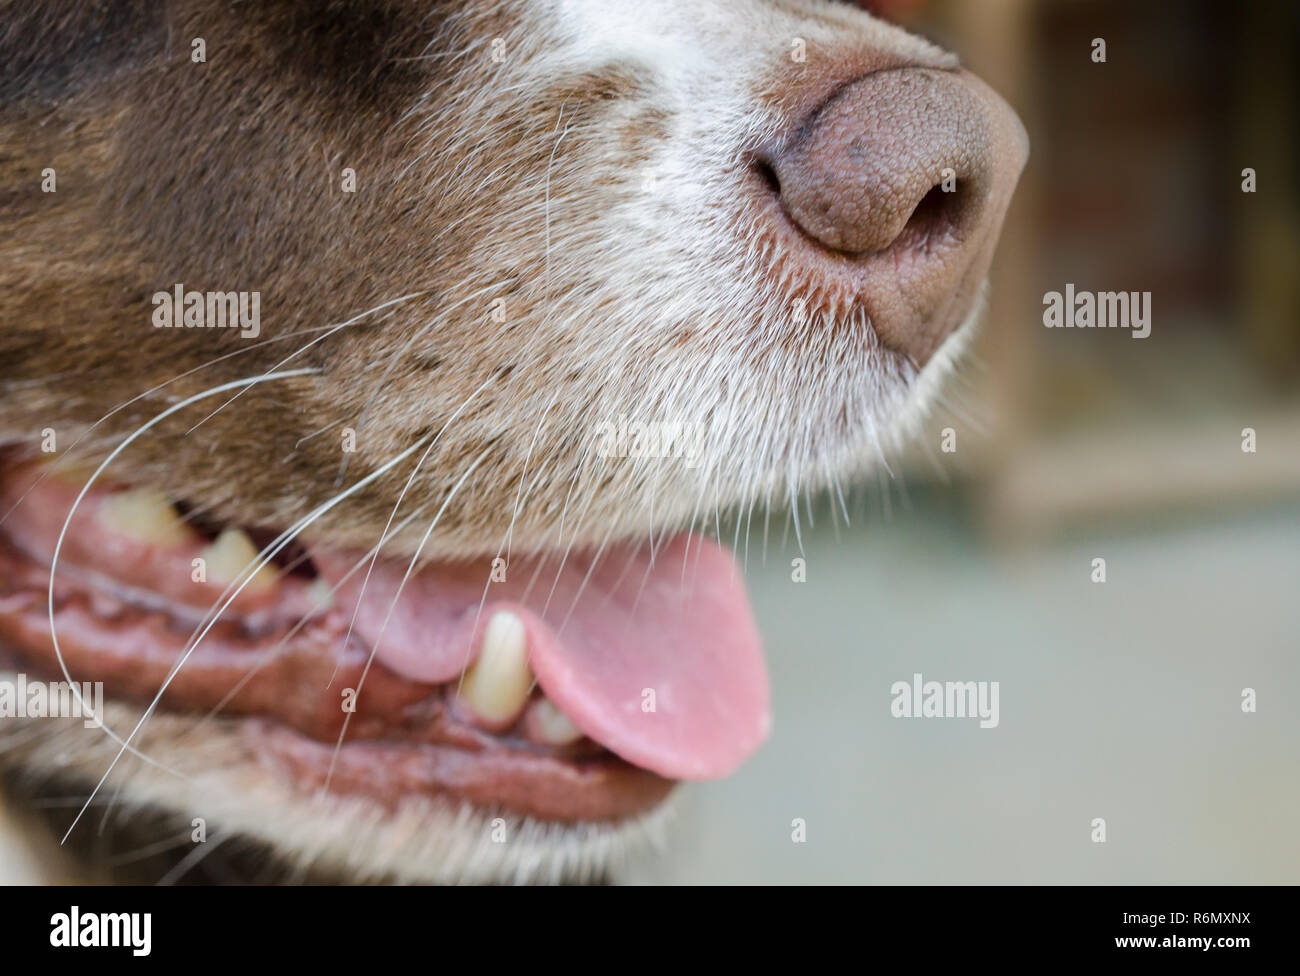 A closeup of the nose of a six-year-old Australian Shepherd dog. A dog's nose is between 1,000 to 10,000 times more sensitive than that of a human. Stock Photo